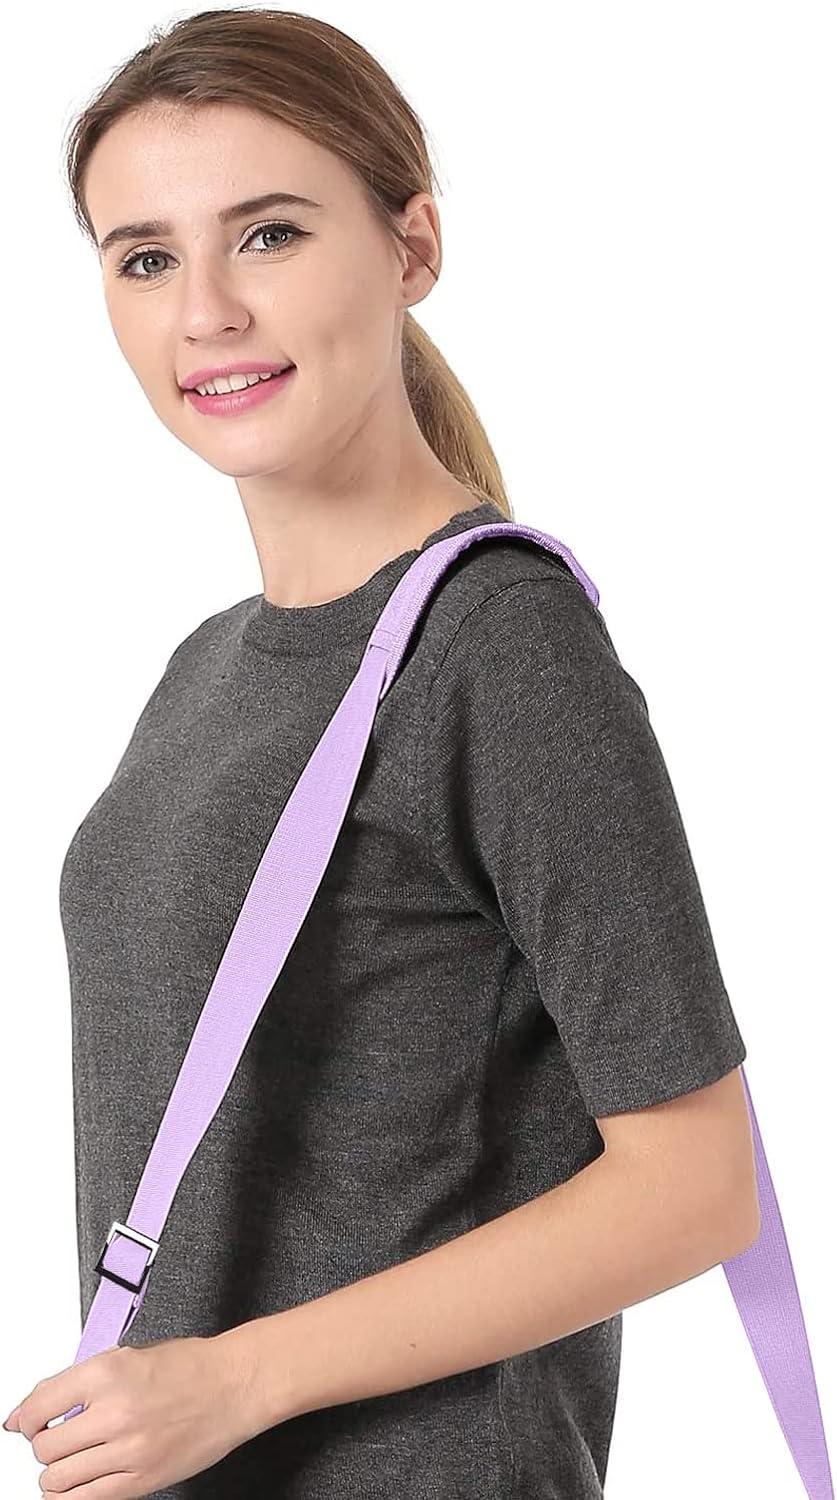 MOSISO 56 inch Shoulder Strap Adjustable Thick Soft Universal